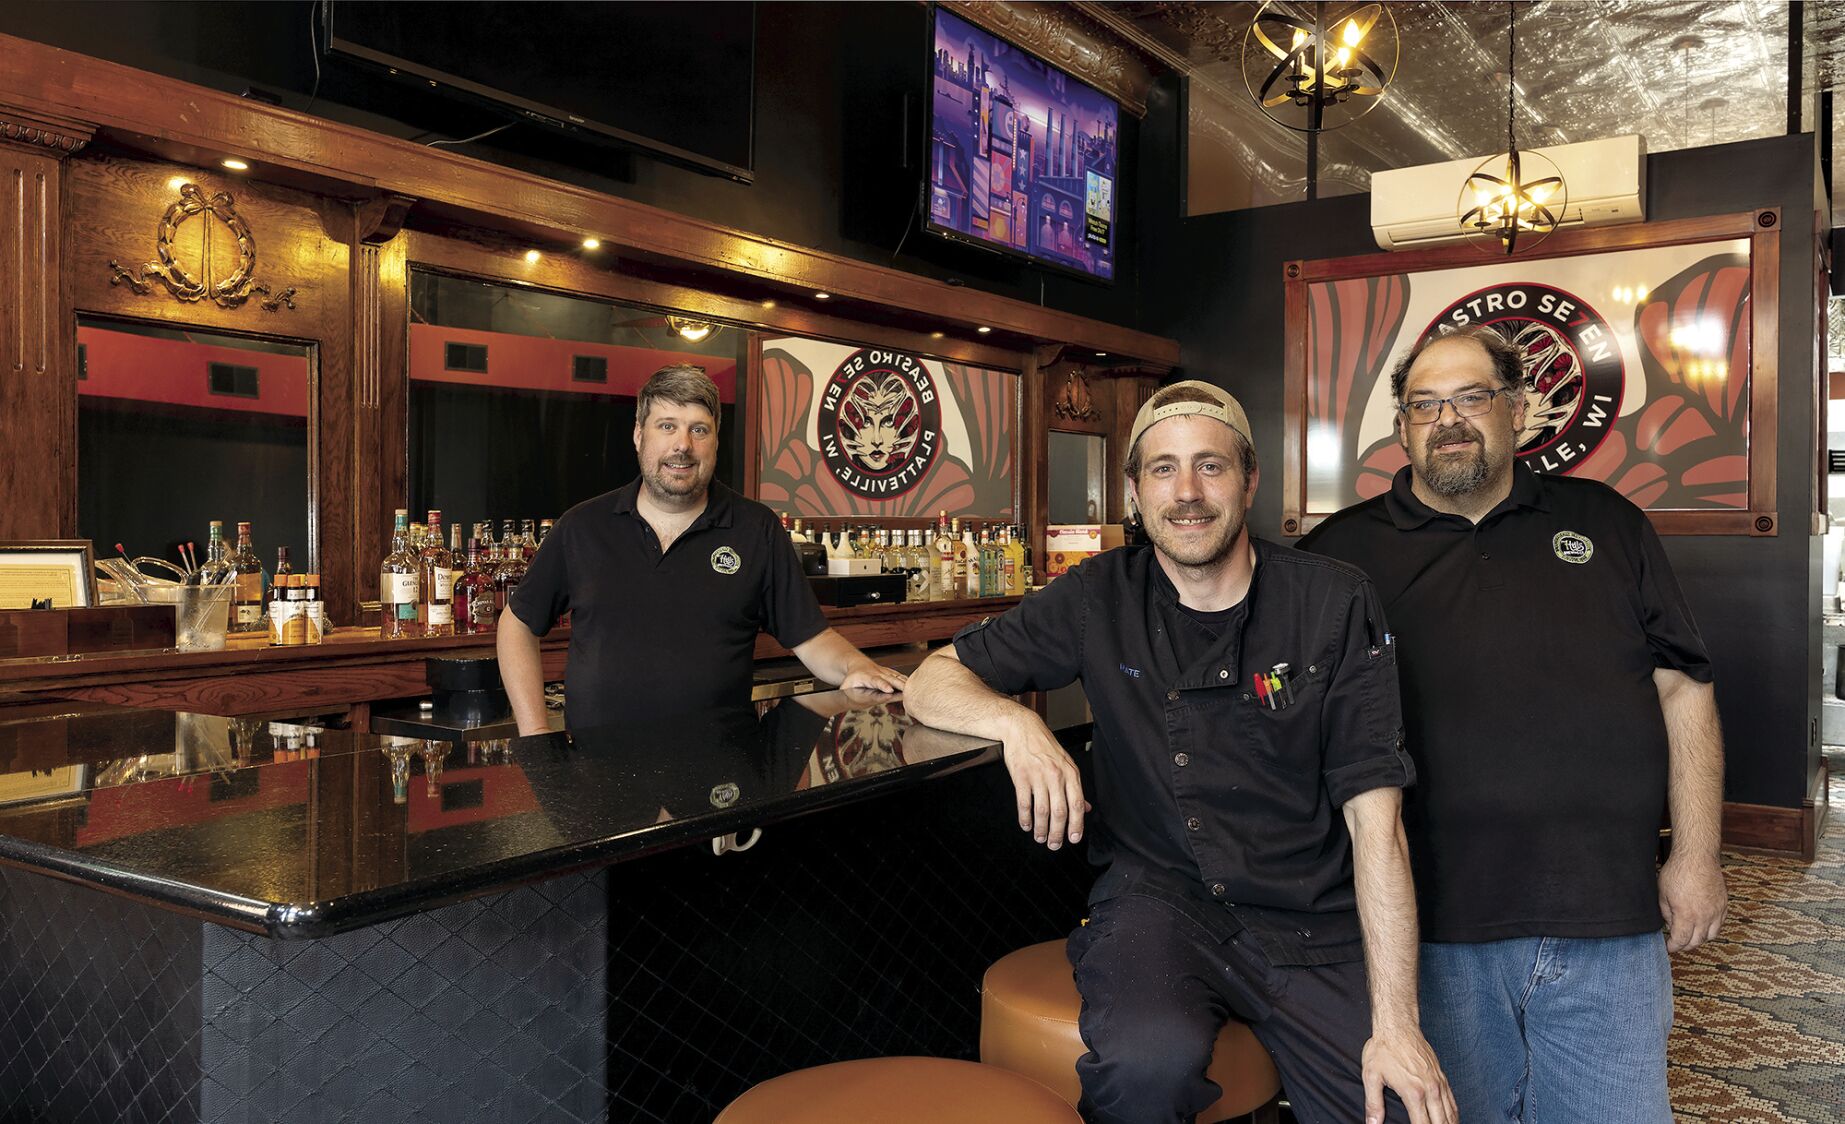 Seven Hills front of house manager Jeremy Hall (from left), Beastro Se7en chef Nate Holland and General Manager John Reuter inside Beastro Se7en on Second Street in Platteville, Wis., on Thursday.    PHOTO CREDIT: Stephen Gassman